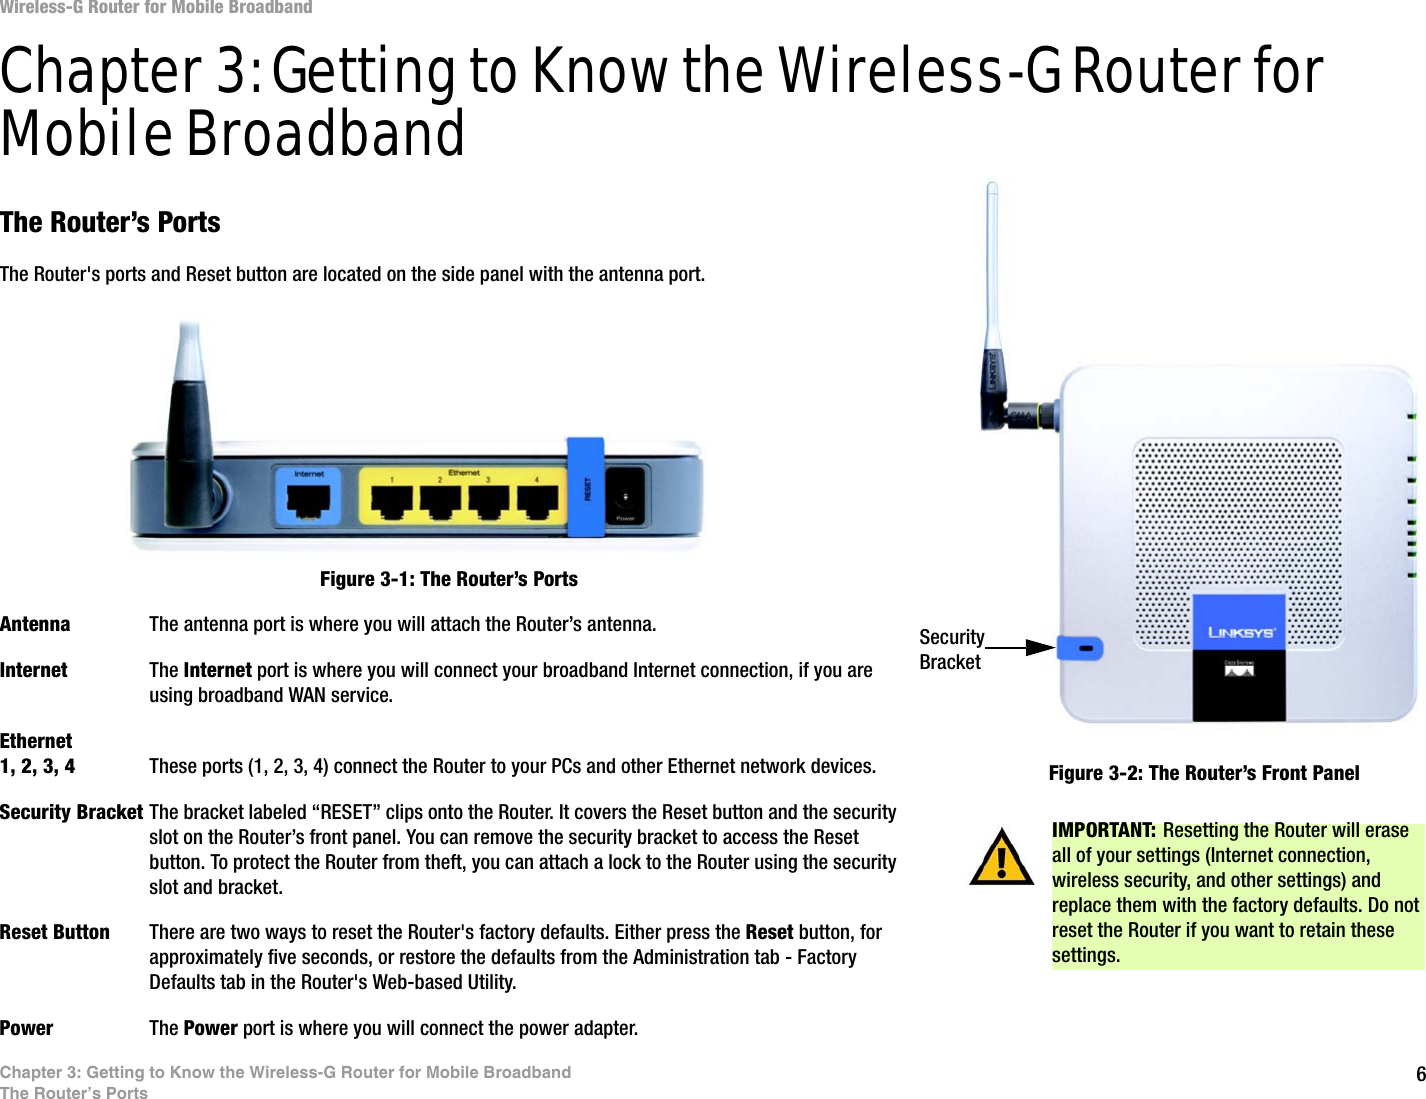 6Chapter 3: Getting to Know the Wireless-G Router for Mobile BroadbandThe Router’s PortsWireless-G Router for Mobile BroadbandChapter 3: Getting to Know the Wireless-G Router for Mobile BroadbandThe Router’s PortsThe Router&apos;s ports and Reset button are located on the side panel with the antenna port.Antenna The antenna port is where you will attach the Router’s antenna.Internet The Internet port is where you will connect your broadband Internet connection, if you are using broadband WAN service.Ethernet 1, 2, 3, 4 These ports (1, 2, 3, 4) connect the Router to your PCs and other Ethernet network devices.Security Bracket The bracket labeled “RESET” clips onto the Router. It covers the Reset button and the security slot on the Router’s front panel. You can remove the security bracket to access the Reset button. To protect the Router from theft, you can attach a lock to the Router using the security slot and bracket.Reset Button There are two ways to reset the Router&apos;s factory defaults. Either press the Reset button, for approximately five seconds, or restore the defaults from the Administration tab - Factory Defaults tab in the Router&apos;s Web-based Utility.Power The Power port is where you will connect the power adapter.IMPORTANT: Resetting the Router will erase all of your settings (Internet connection, wireless security, and other settings) and replace them with the factory defaults. Do not reset the Router if you want to retain these settings.Figure 3-1: The Router’s PortsFigure 3-2: The Router’s Front PanelSecurity Bracket